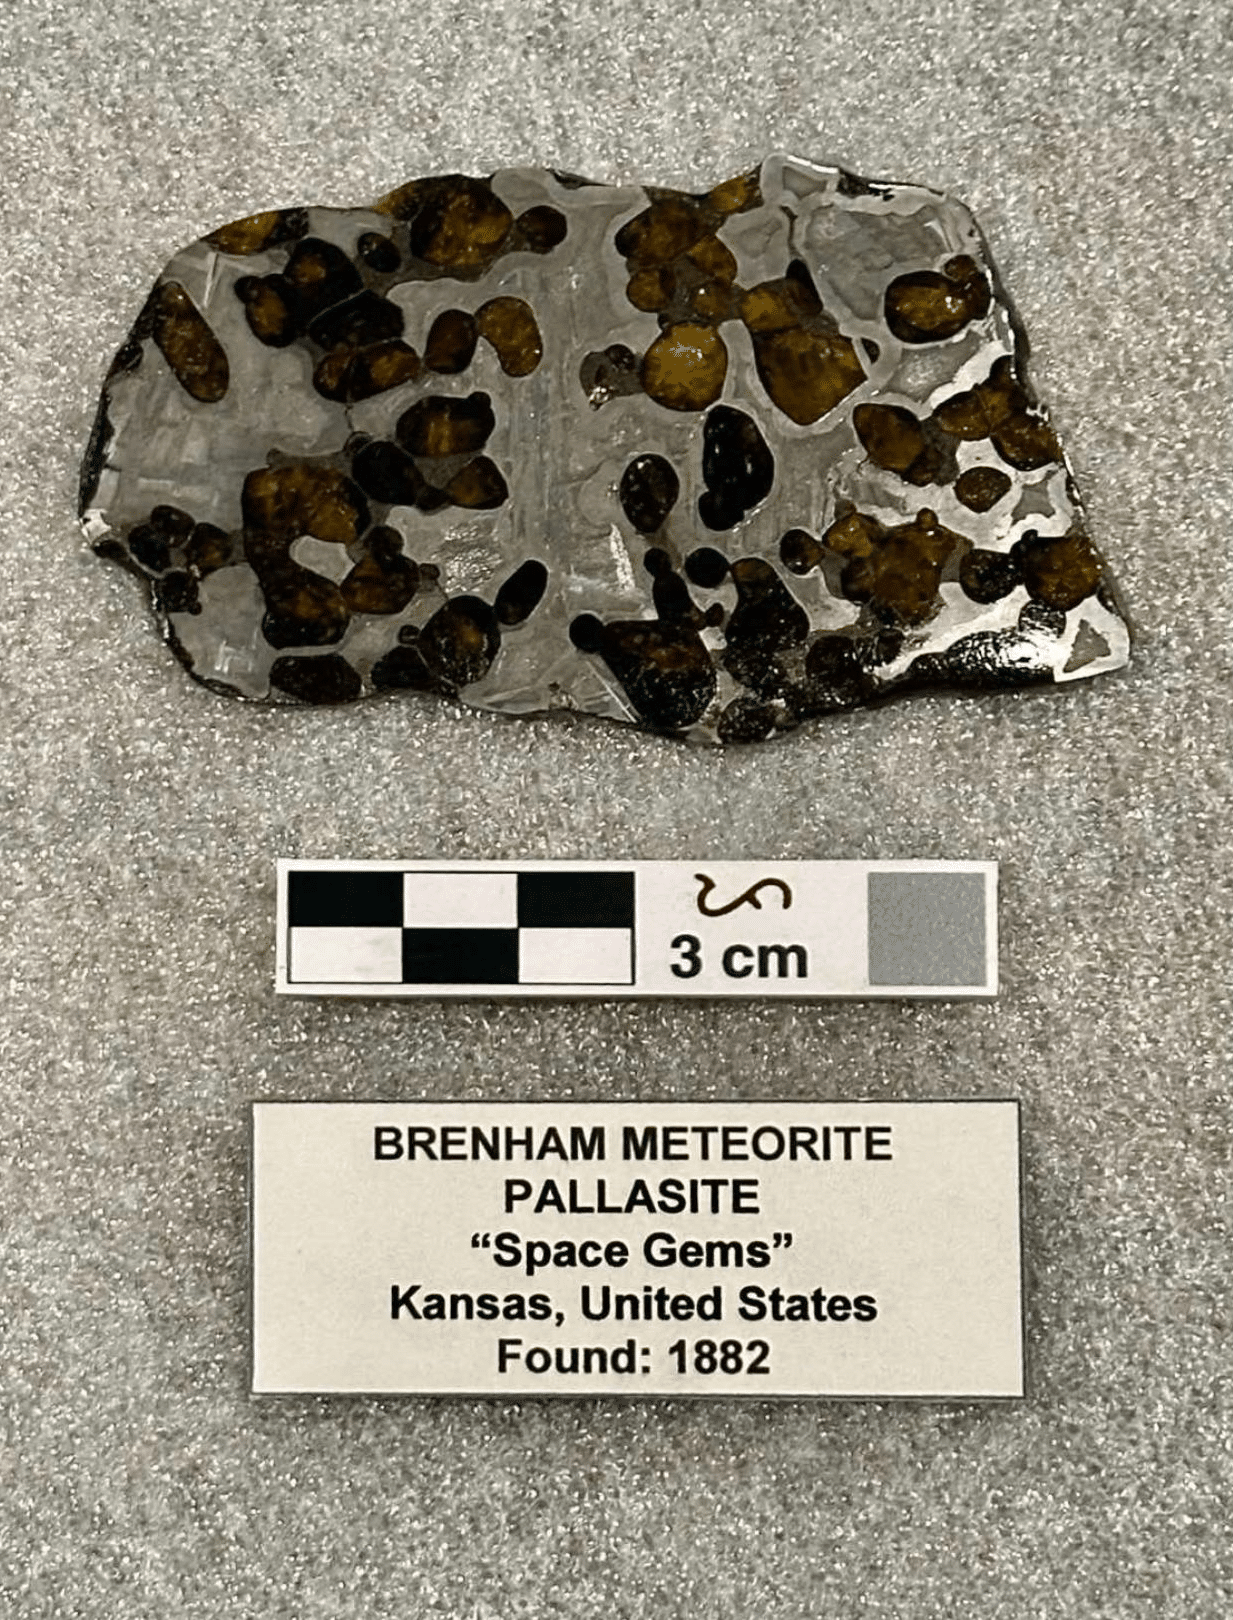 National museum receives meteorite collection